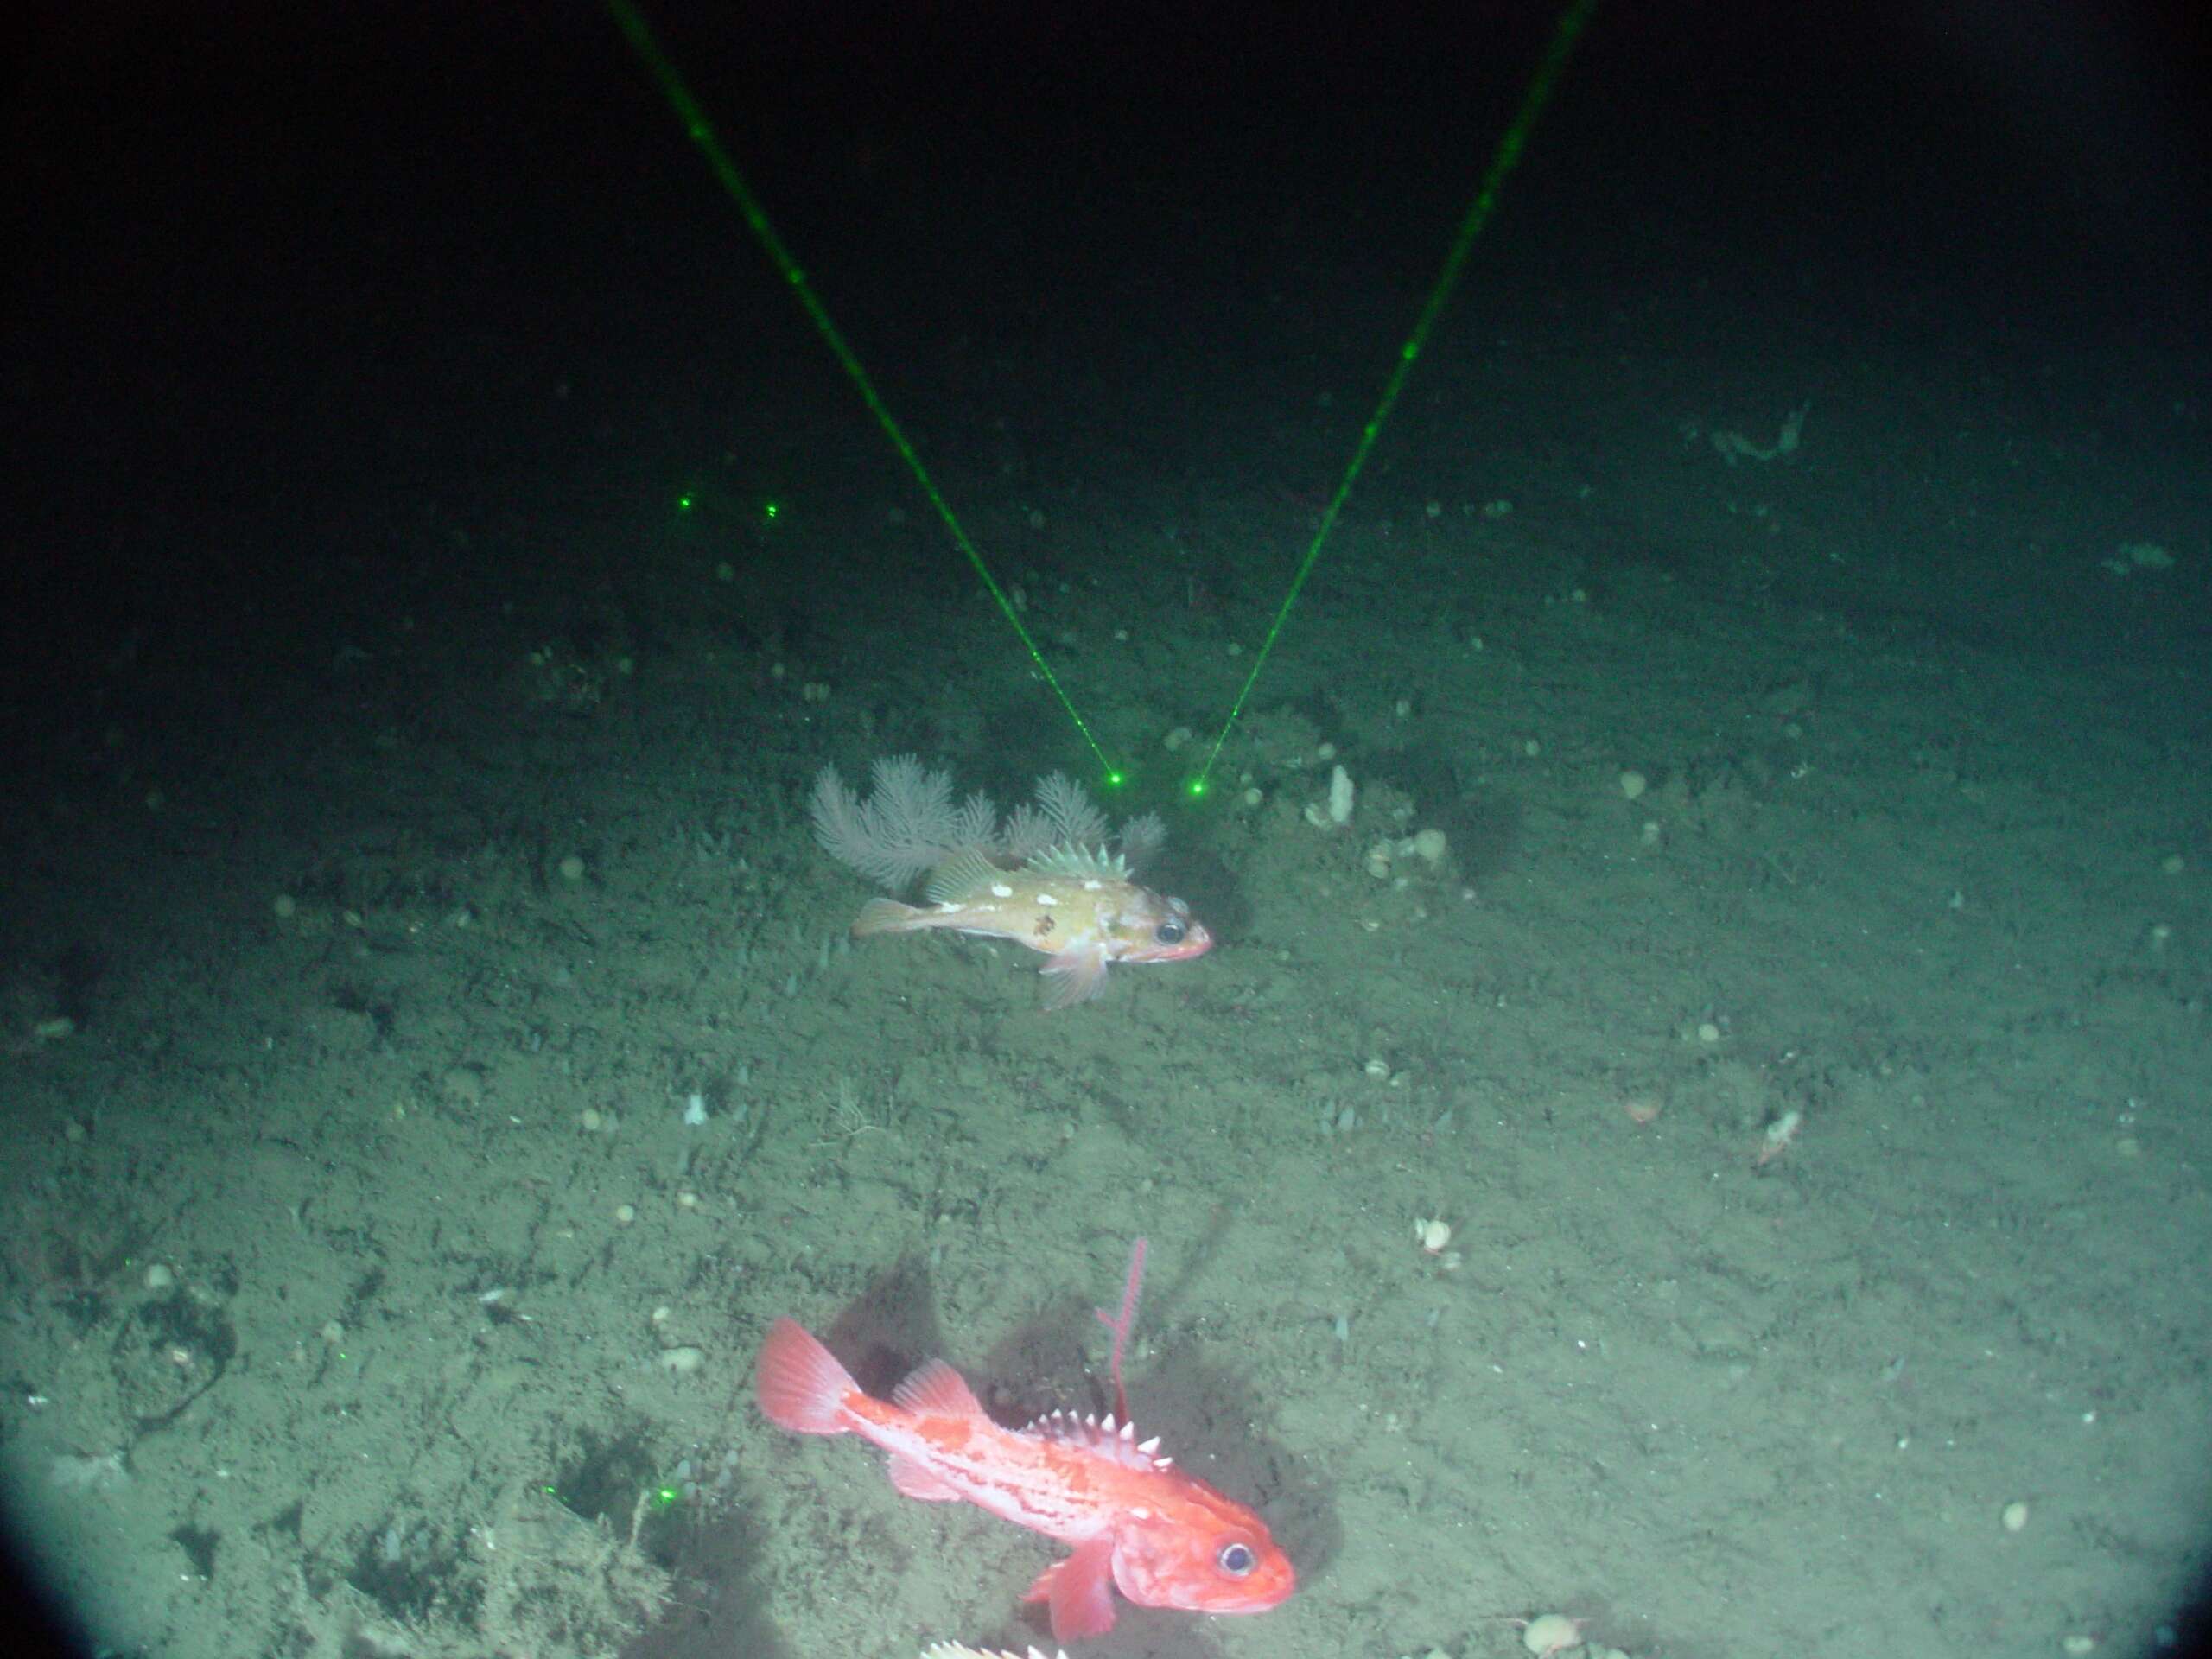 Image of deep-sea bristly scorpionfishes